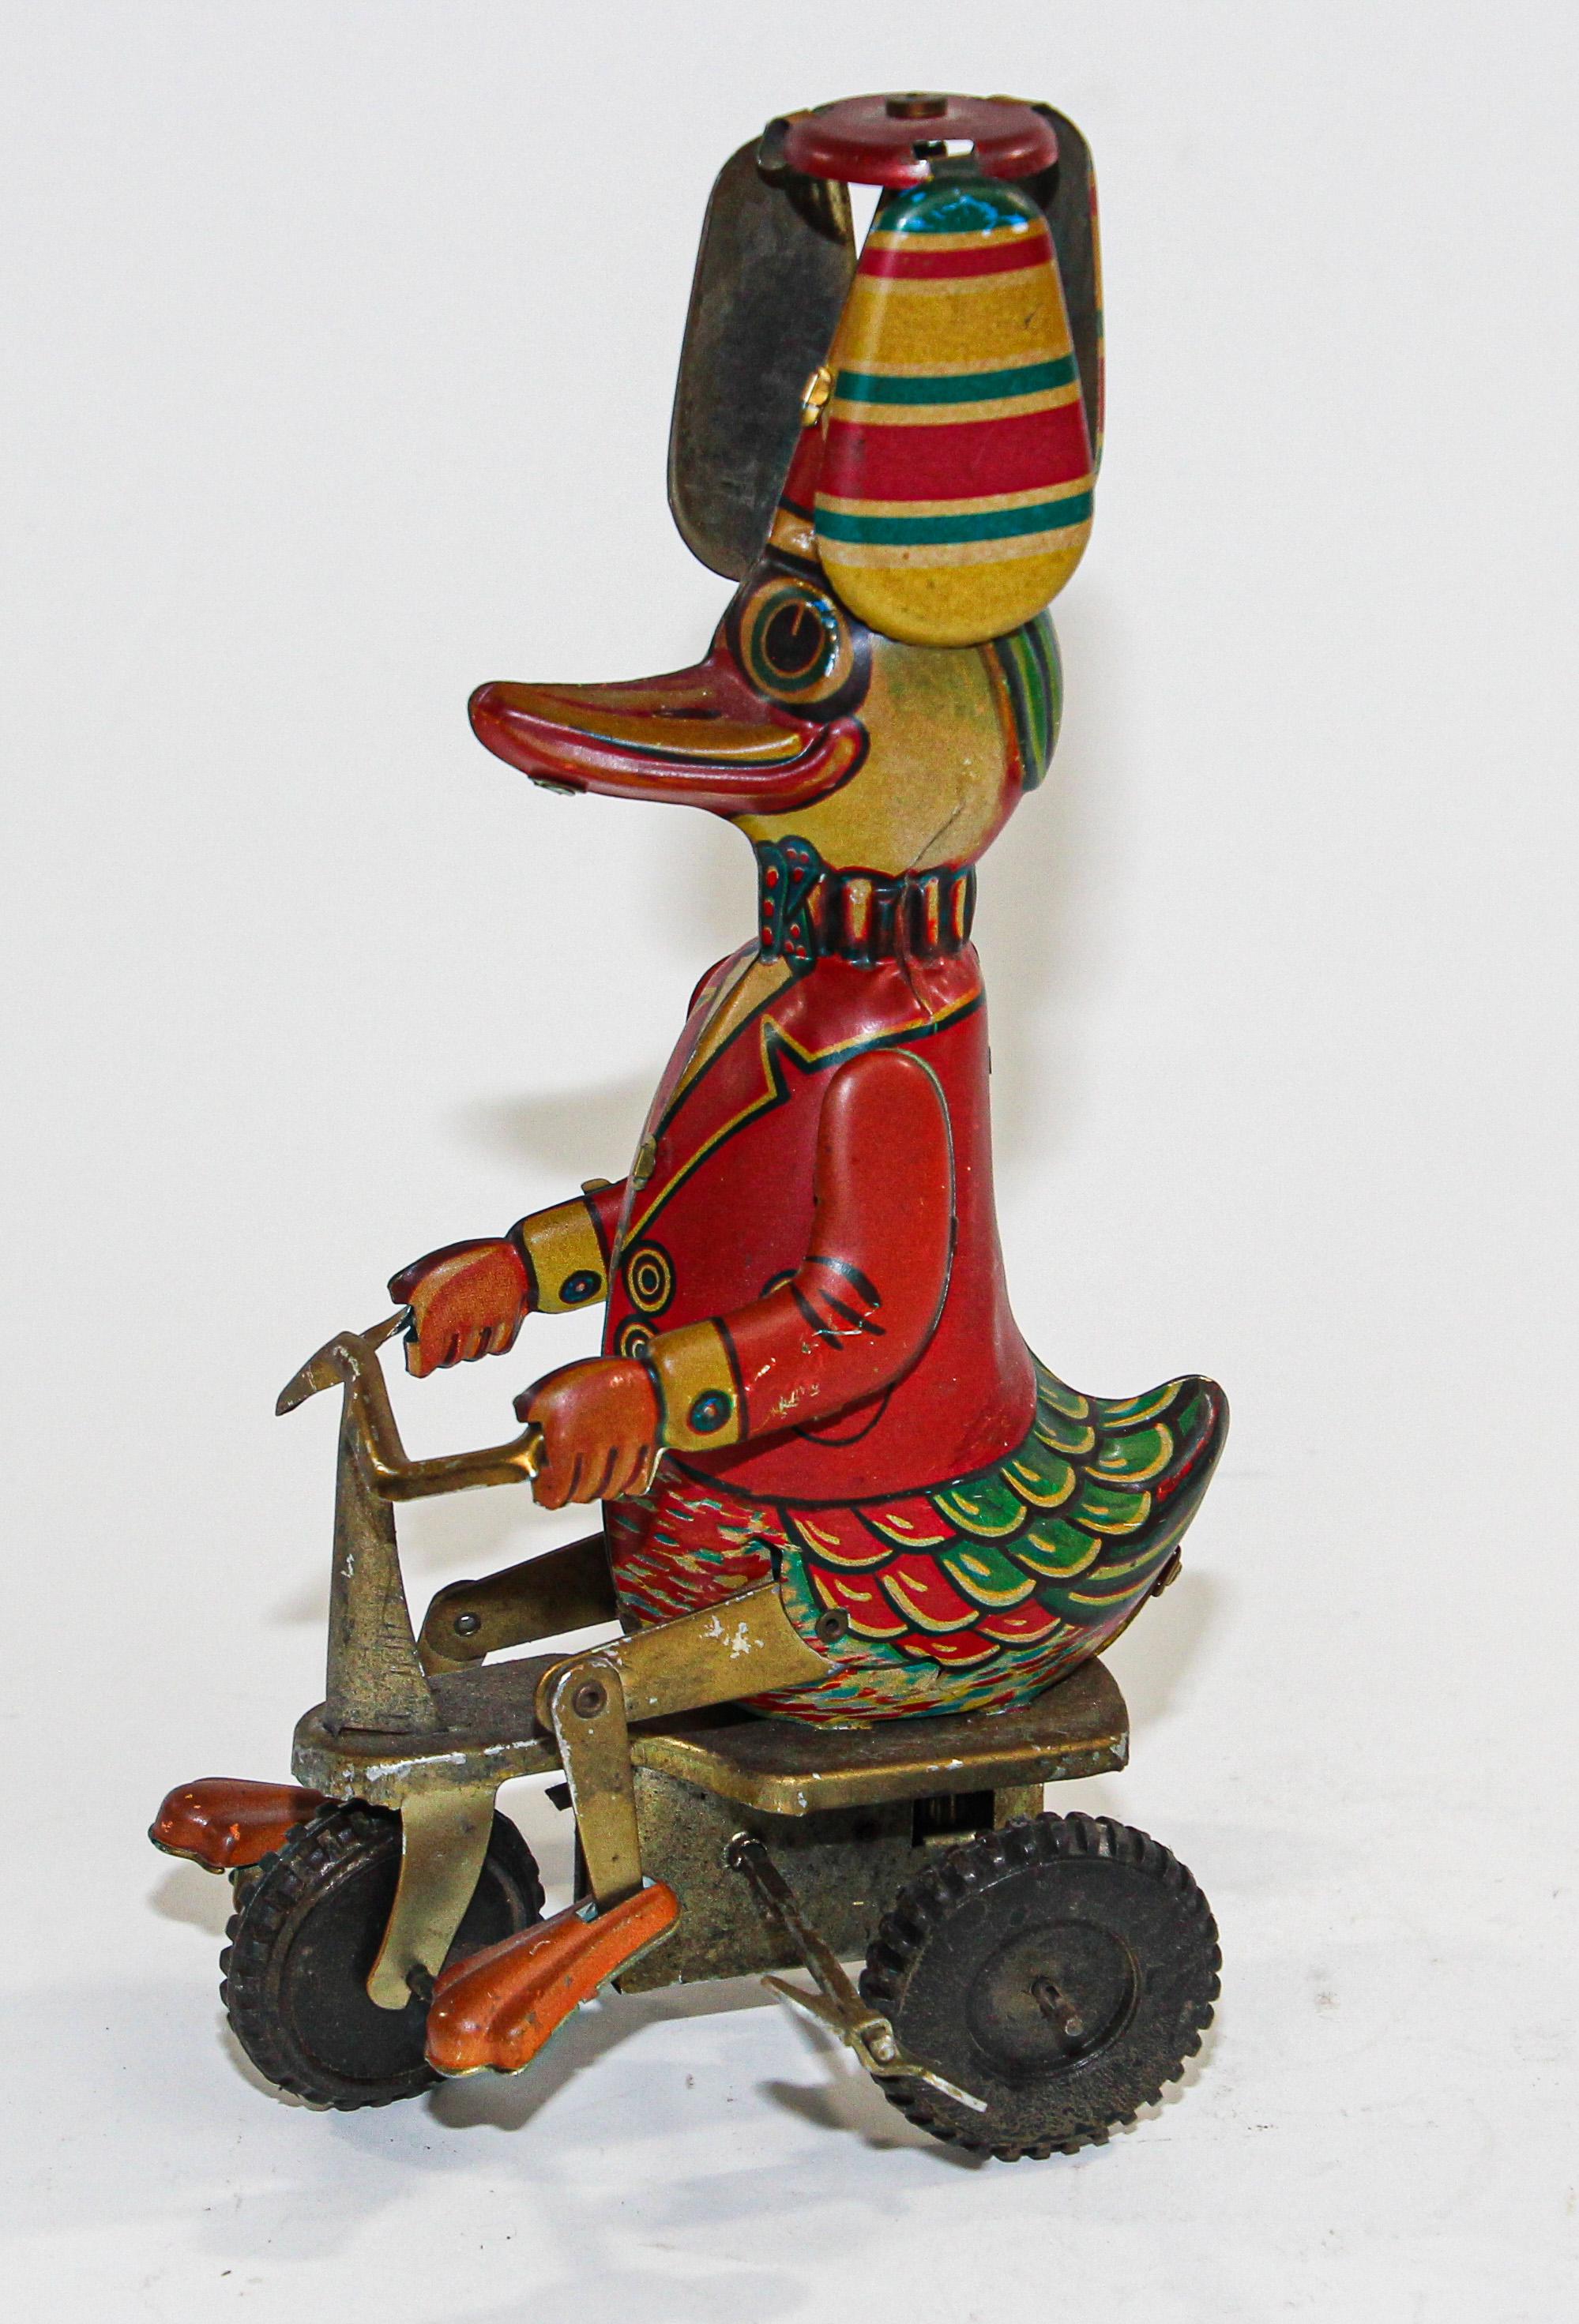 Vintage style mechanical tin metal wind-up duck on bike.
In good working order 
This vintage style wind-up toy is made of beautify printed tin. 
Use the key to wind up the colorfully dressed happy duck and watch him pedal his bike while the